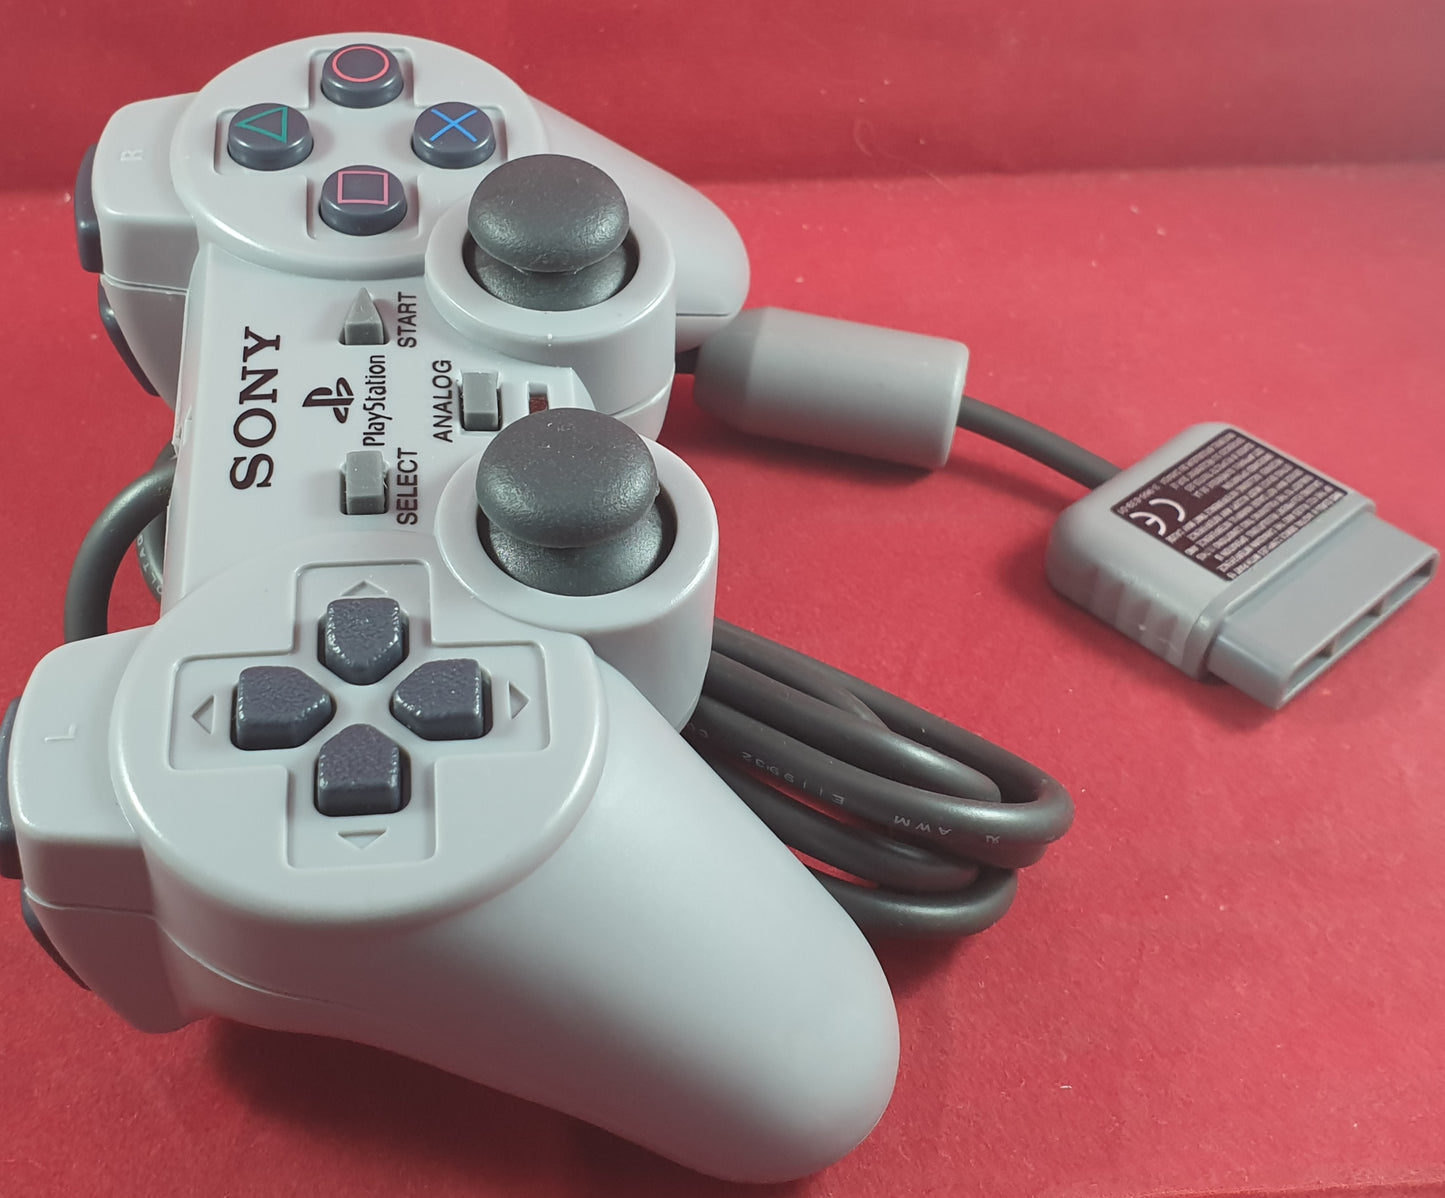 Boxed Sony Playstation 1 (PS1) Analog Controller SCPH 1200 Made in Japan Accessory